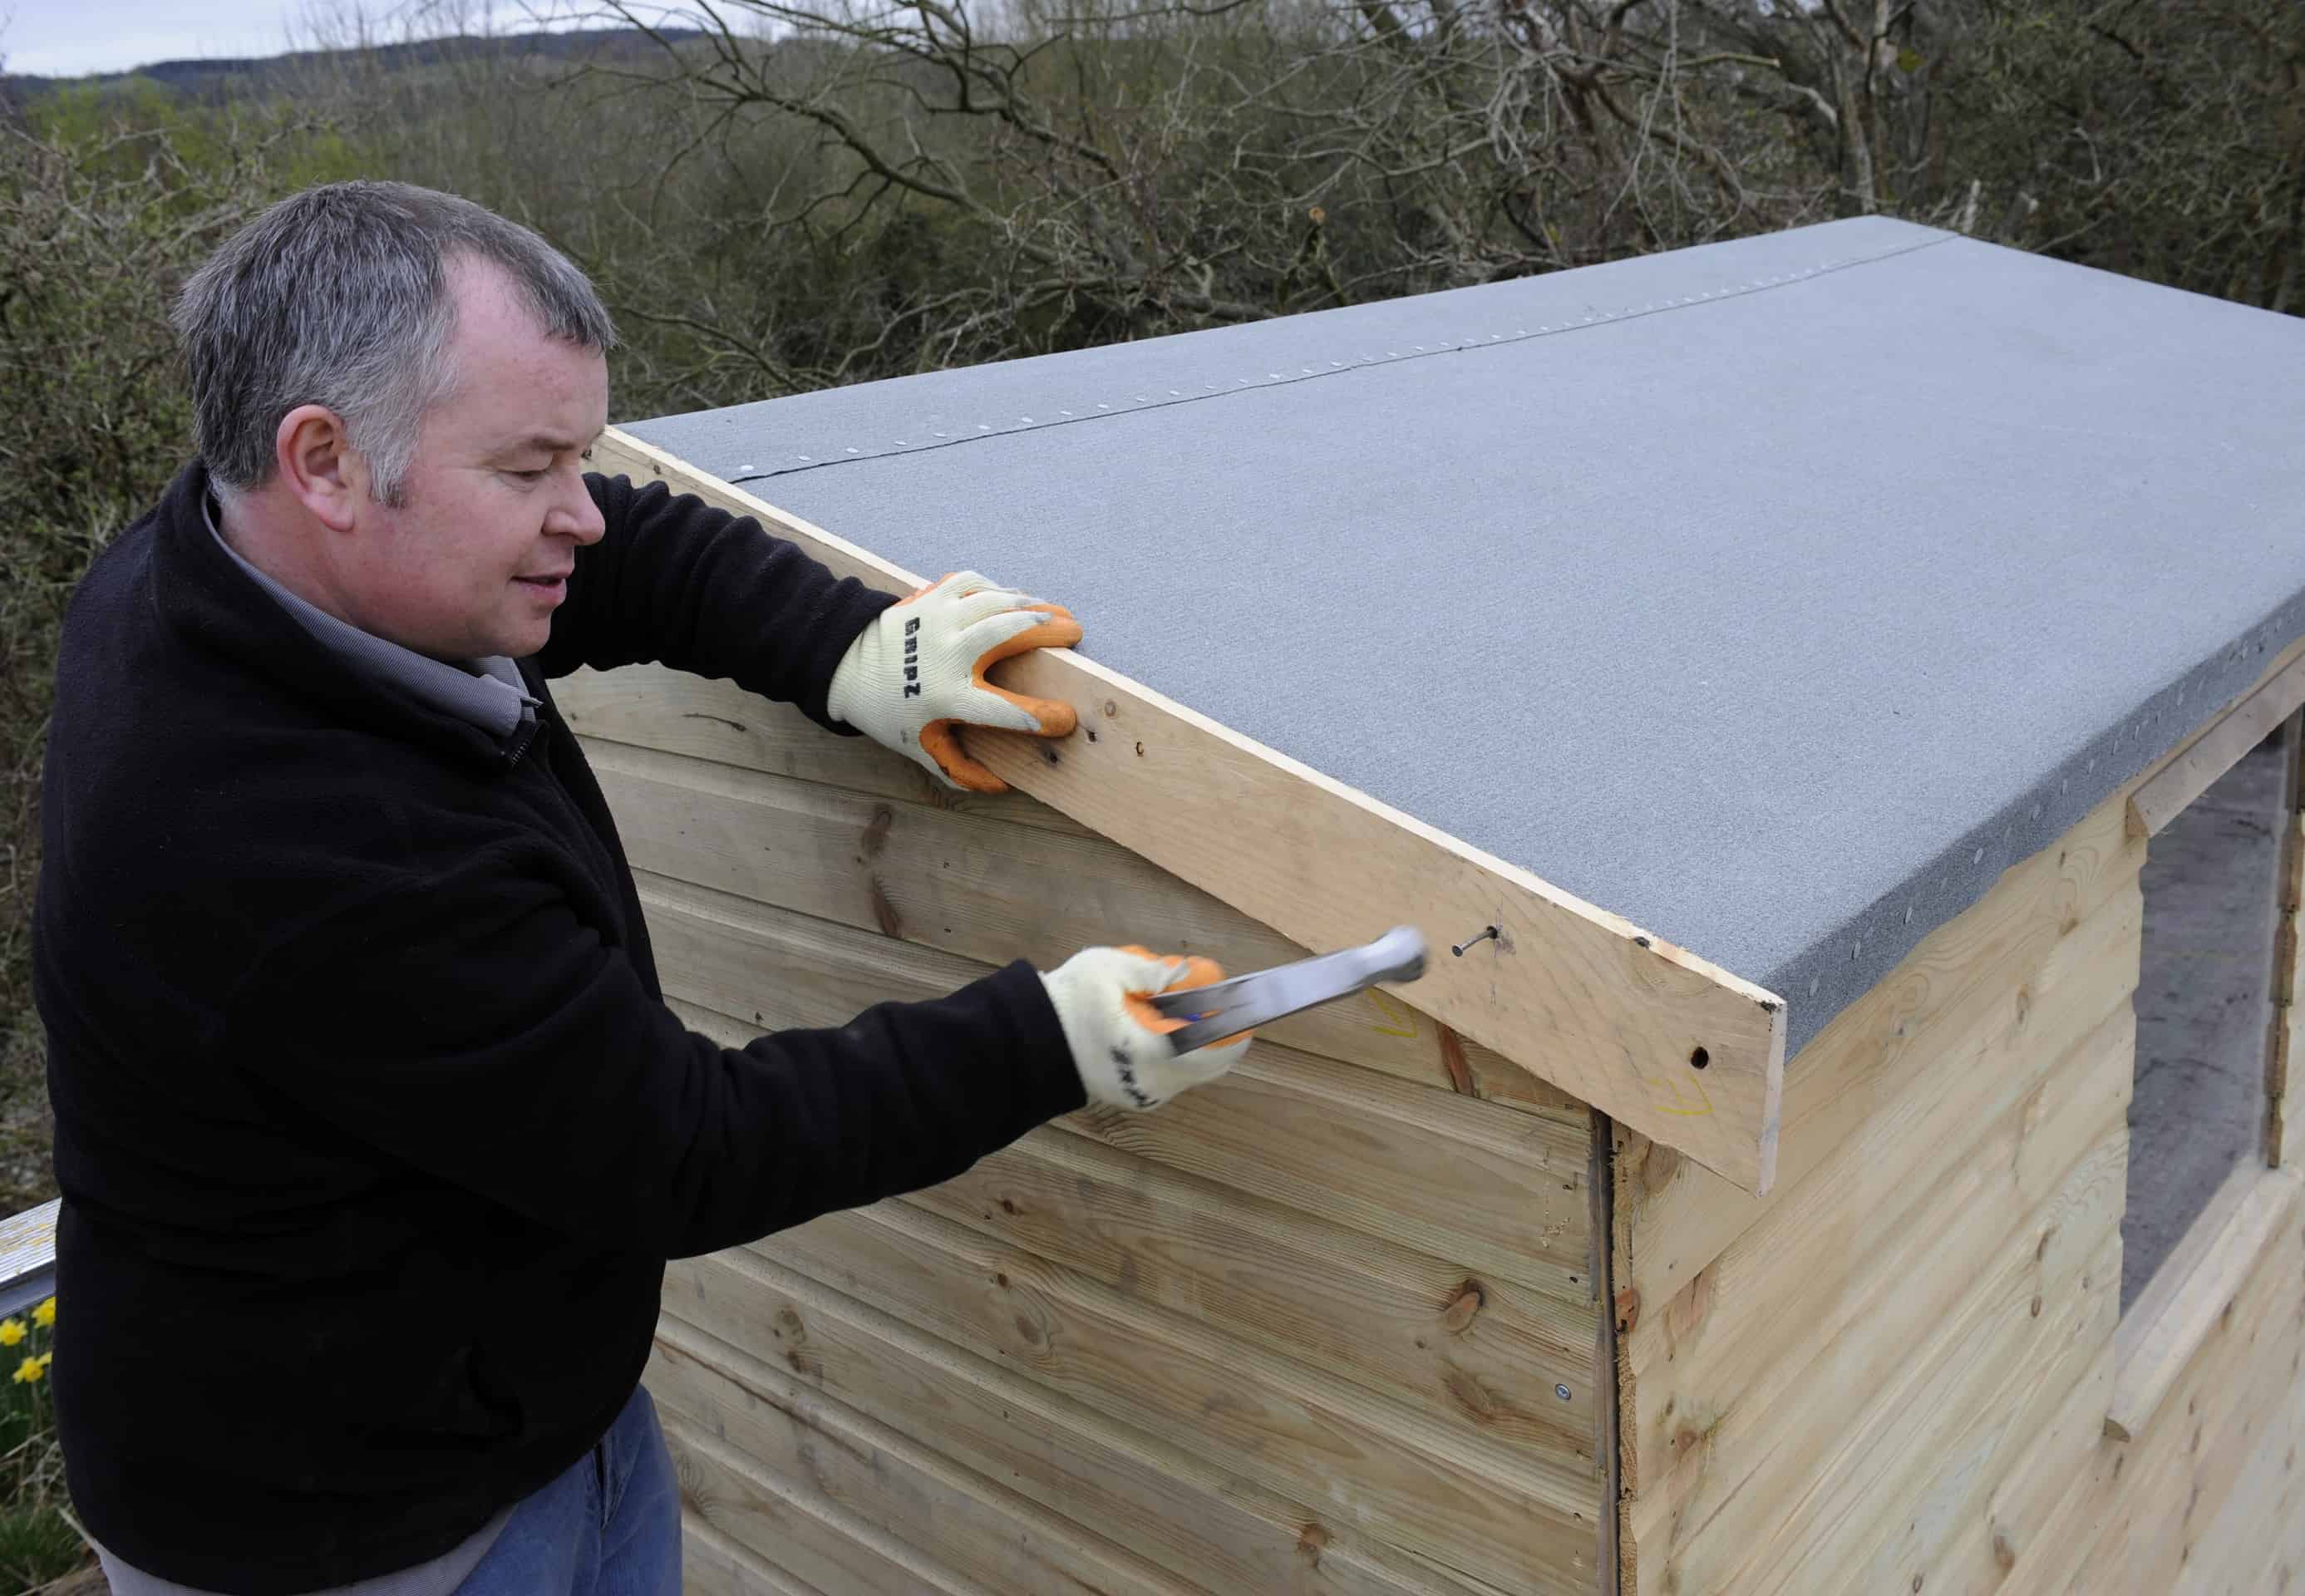 How to reroof a shed - shed roofing felt gudie from IKO